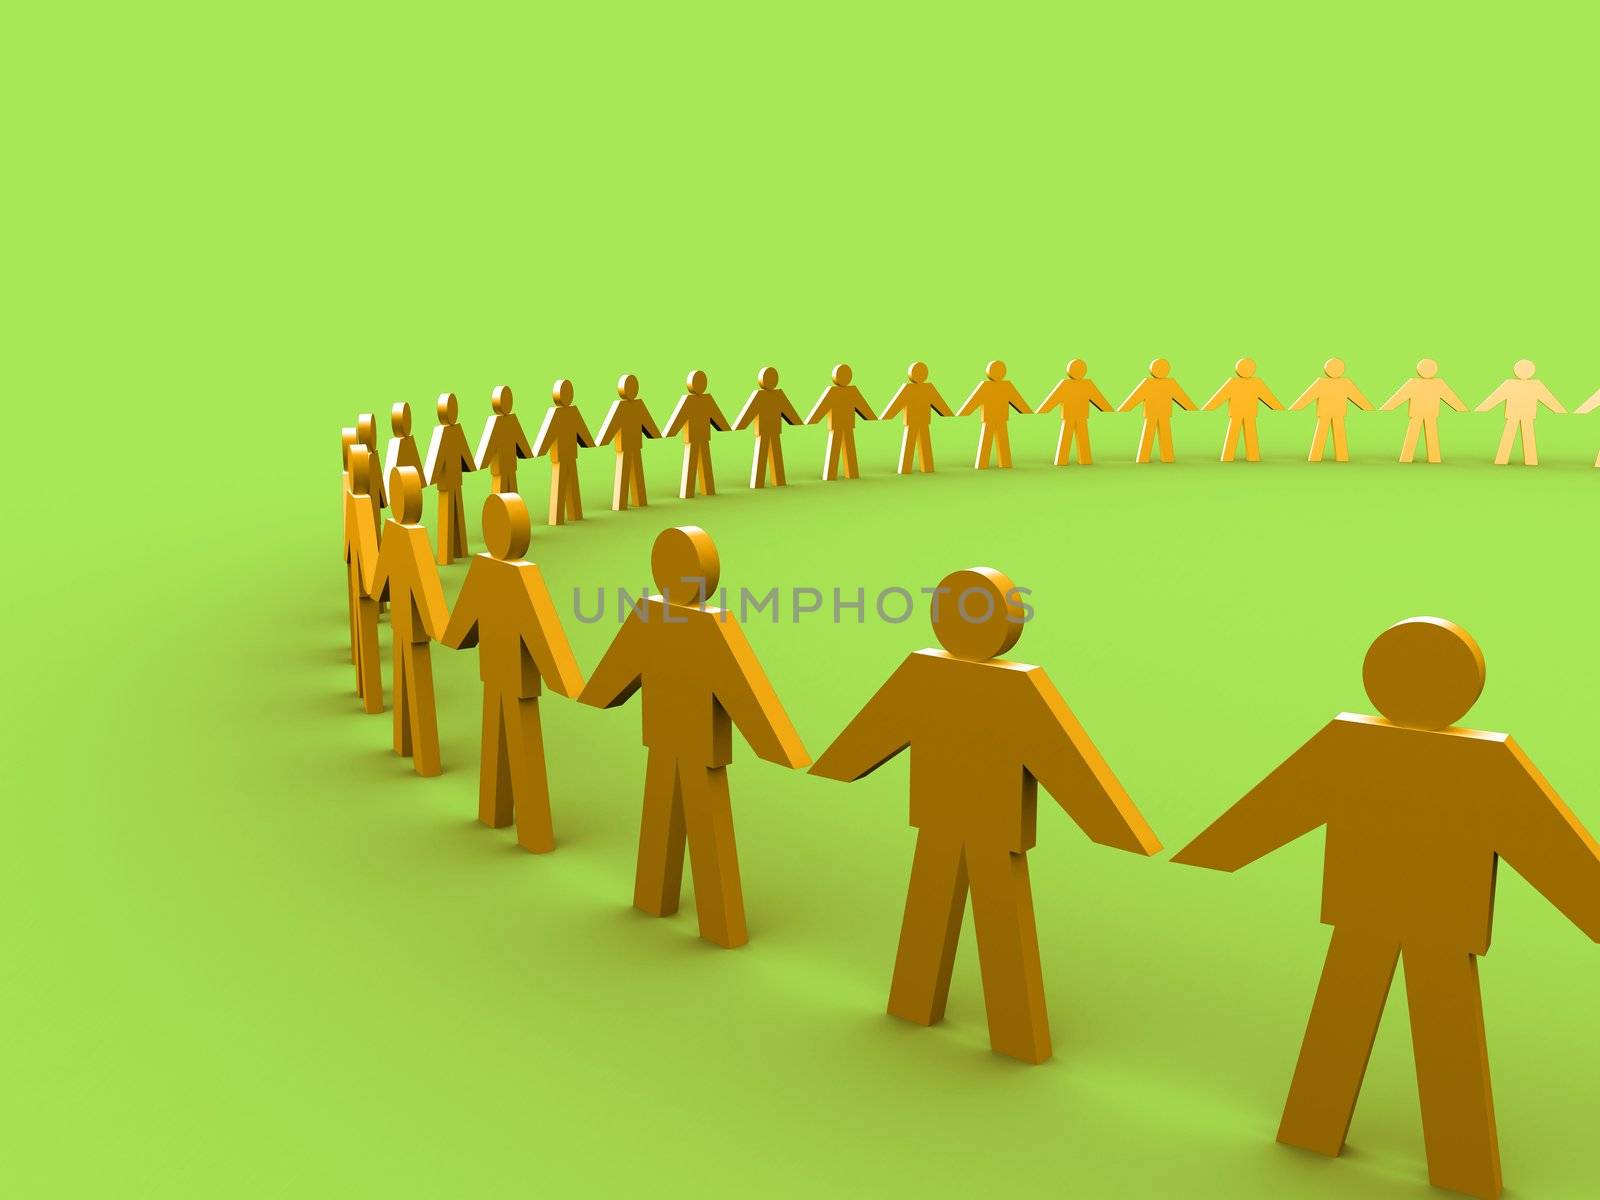 3d people holding hands and forming a big circle.